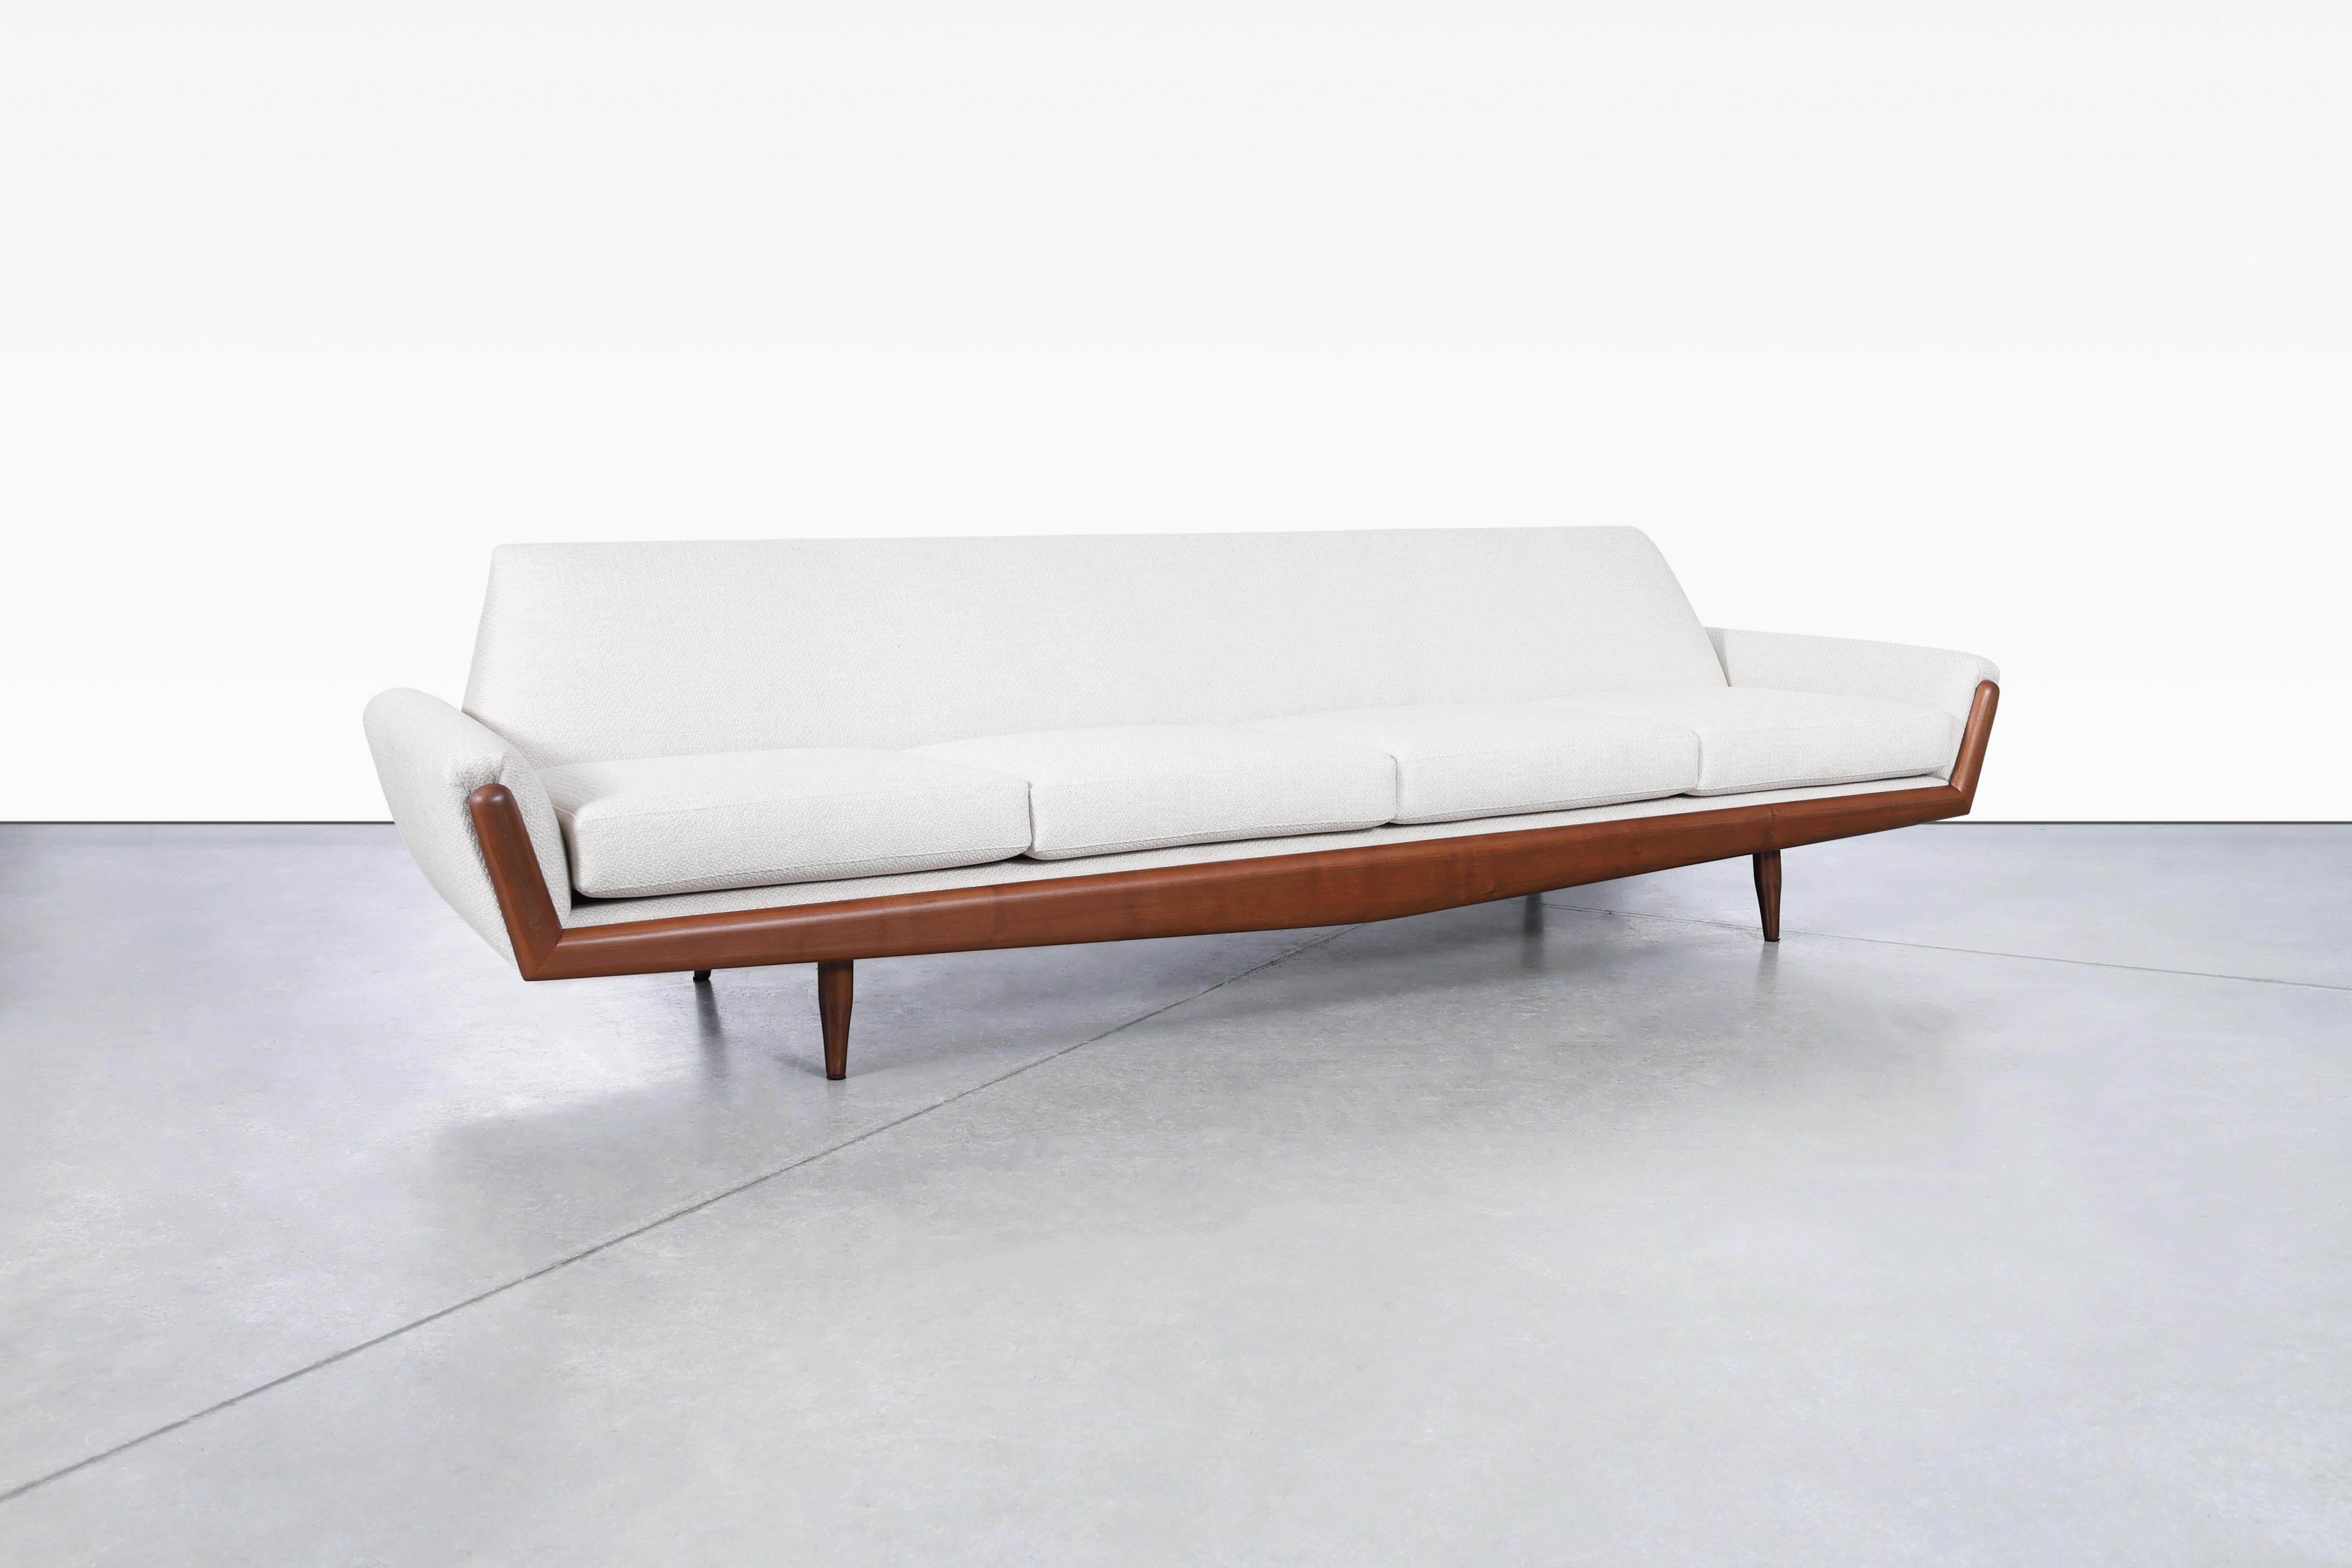 Wonderful vintage walnut “Gondola” sofa designed by Adrian Pearsall for Craft Associates in United States, circa 1960s. This modernist sofa, also known as model-2000, is composed of a sculpted walnut base with elegant vibes, the seat has four